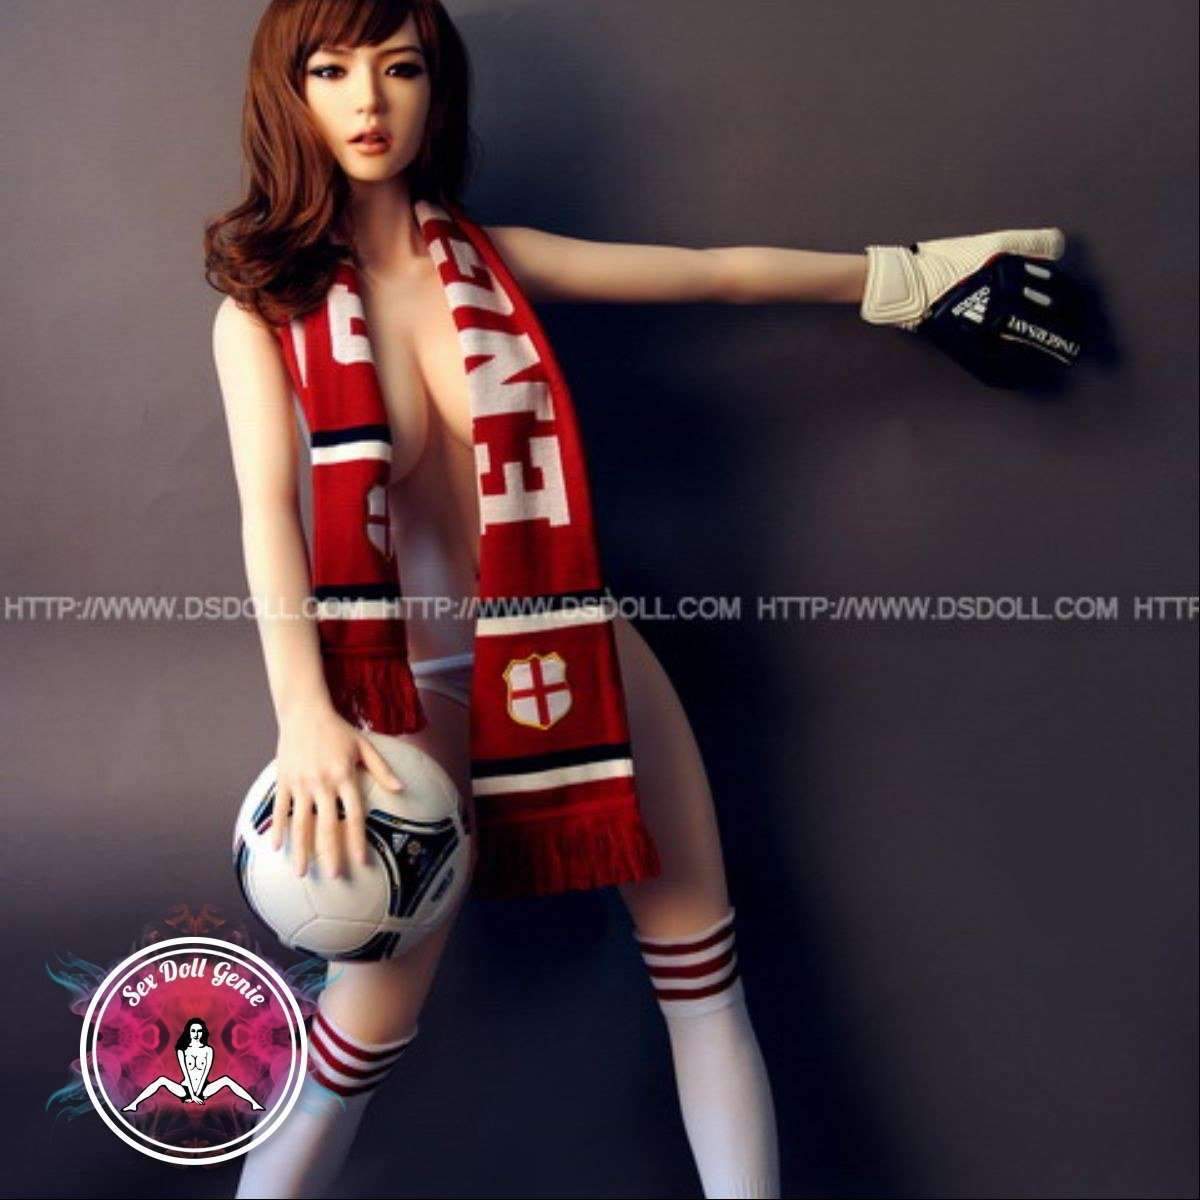 DS Doll - 160Plus - Kayla Head - Type 2 D Cup Silicone Doll-25